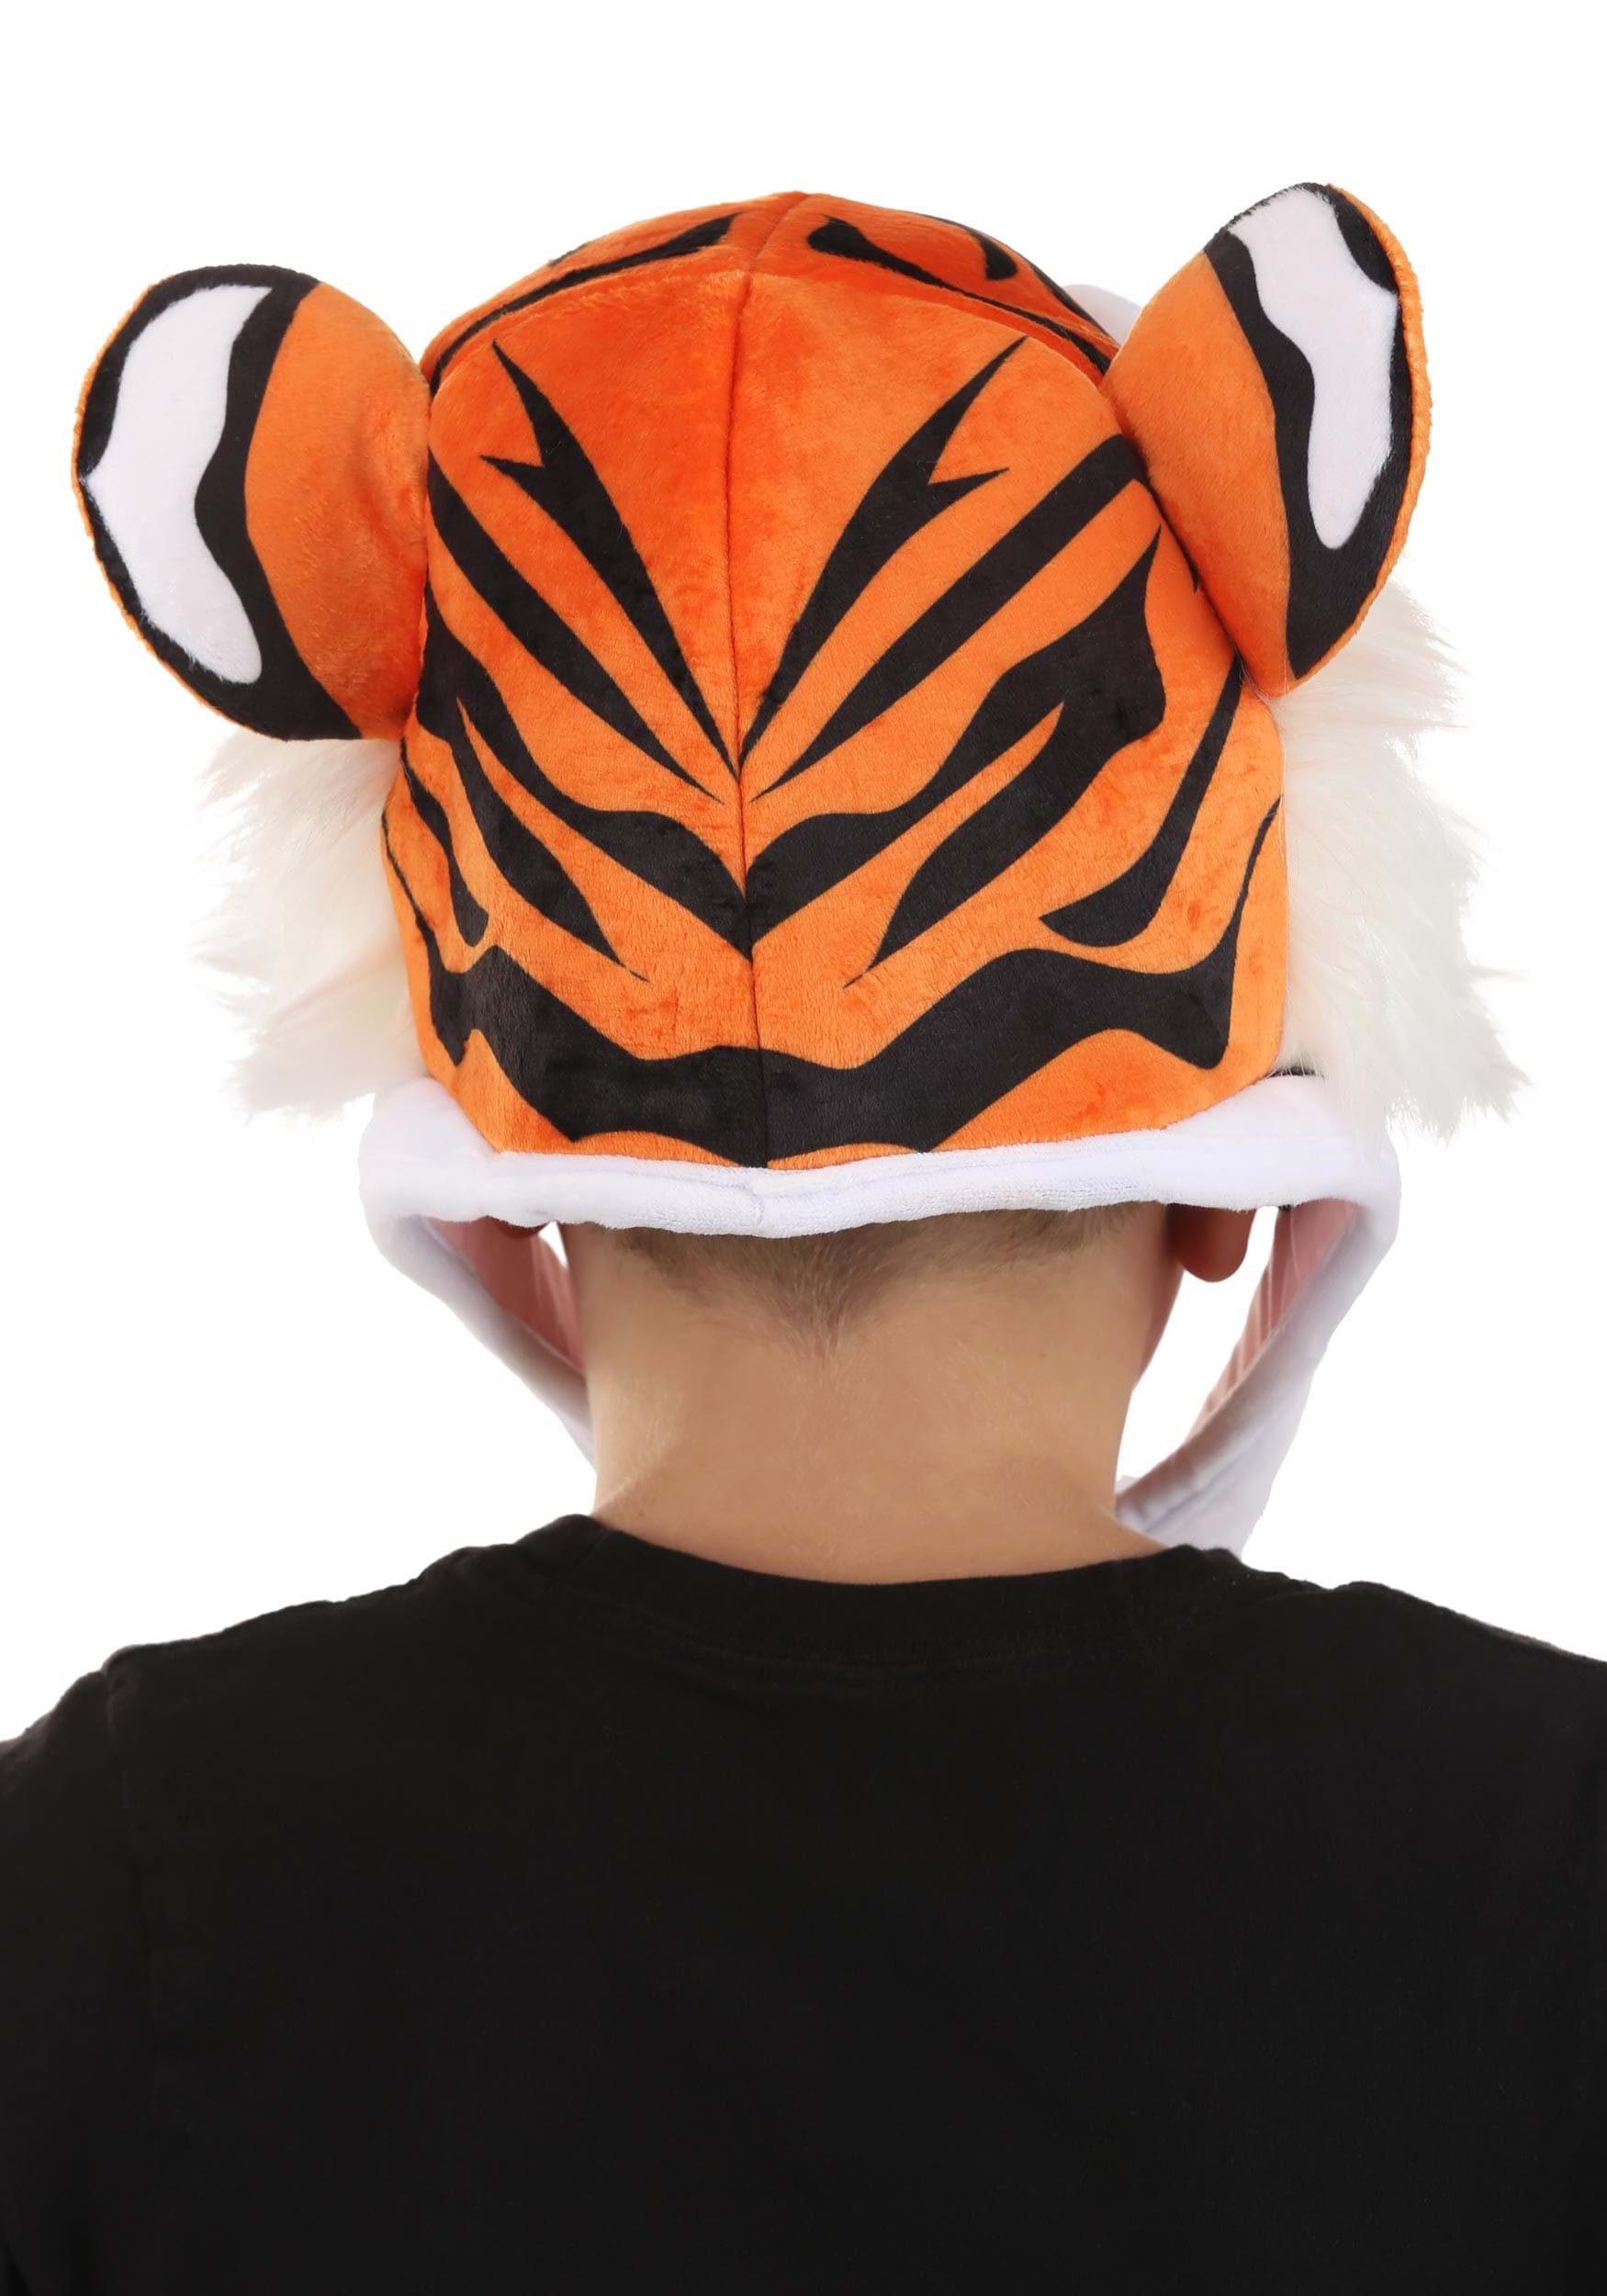 Jawesome Tiger Hat